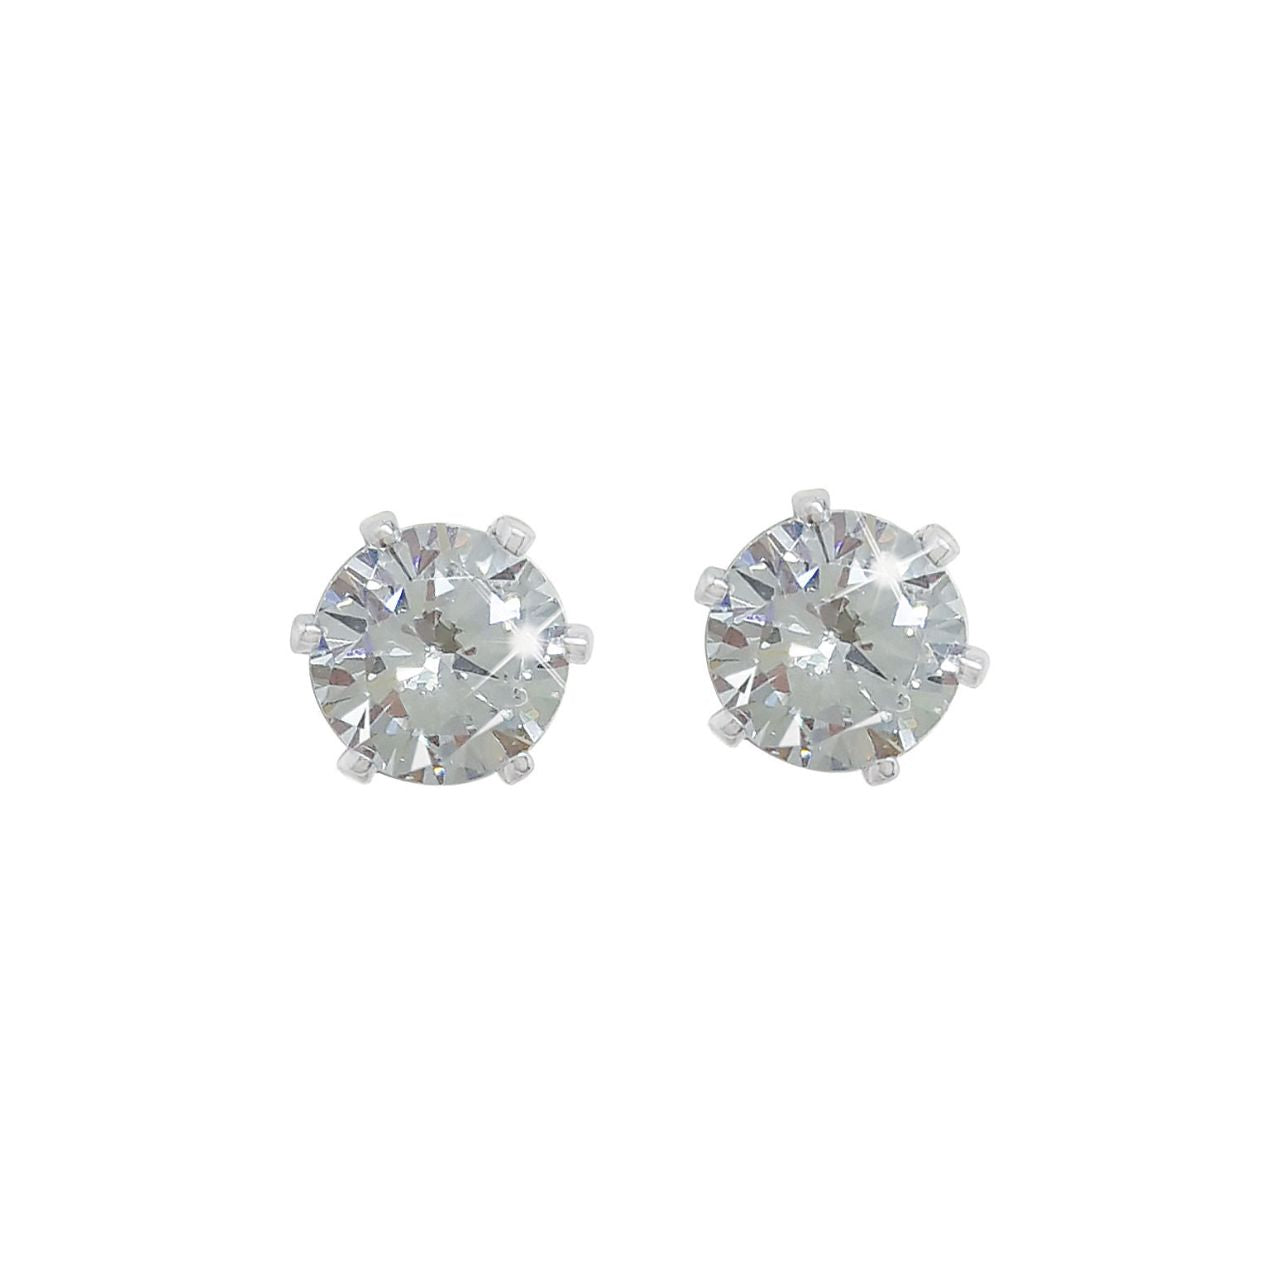 A captivating and impressive look, these dazzling solitaire stud earrings make a stunning accompaniment to any look or any occasion. Fashioned in cool silver each earring showcases a mesmerising clear crystal solitaire in a stylish six prong silver setting. Buffed to a brilliant lustre, these versatile post earrings fasten securely and comfortably with push backs.